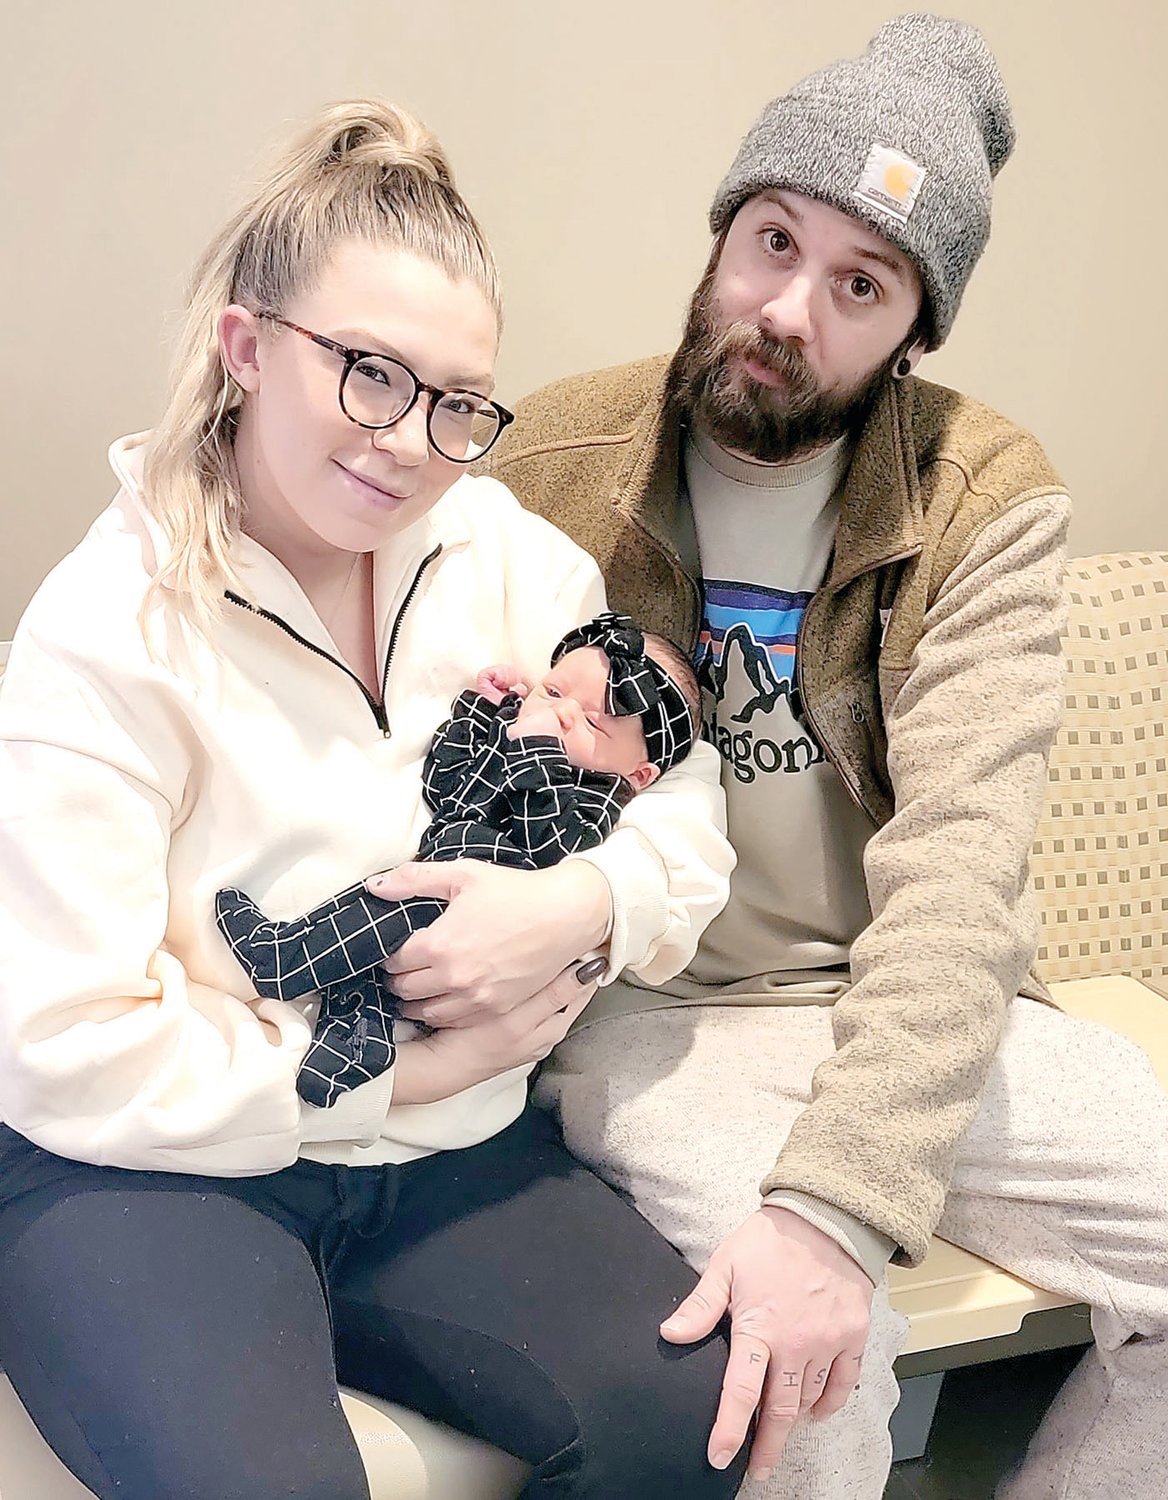 Robyn Van Hise and Noah Donovan of Flemington, N.J., left, are the proud parents of a baby girl, Briar Snow Donovan, who was born at 2:48 a.m. on Jan. 1 at Hunterdon Medical Center.